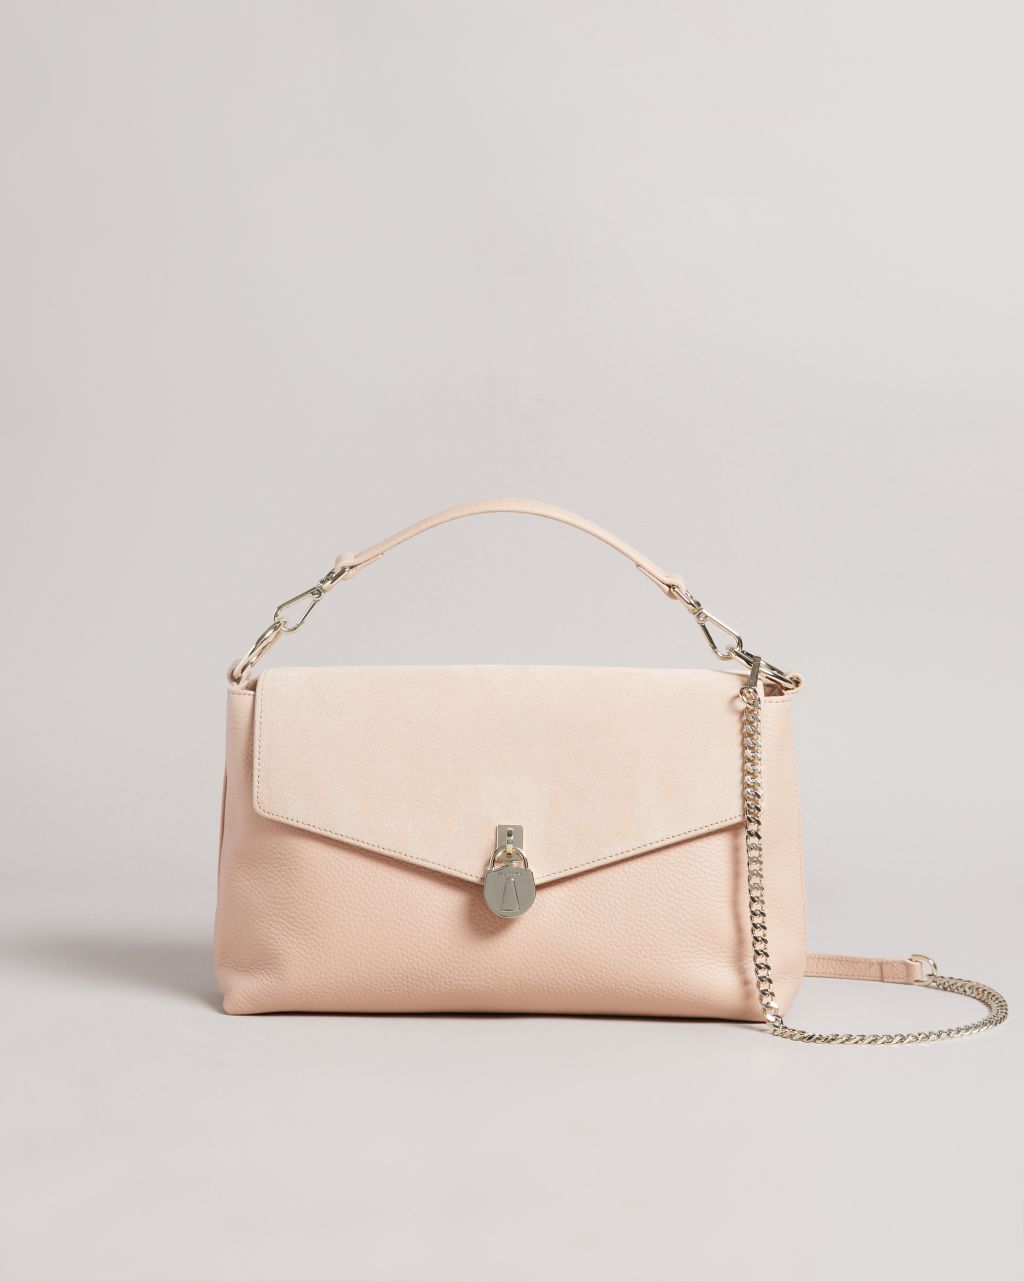 Ted Baker Women's Suede Padlock Shoulder Bag in Taupe, Marieaa, Leather